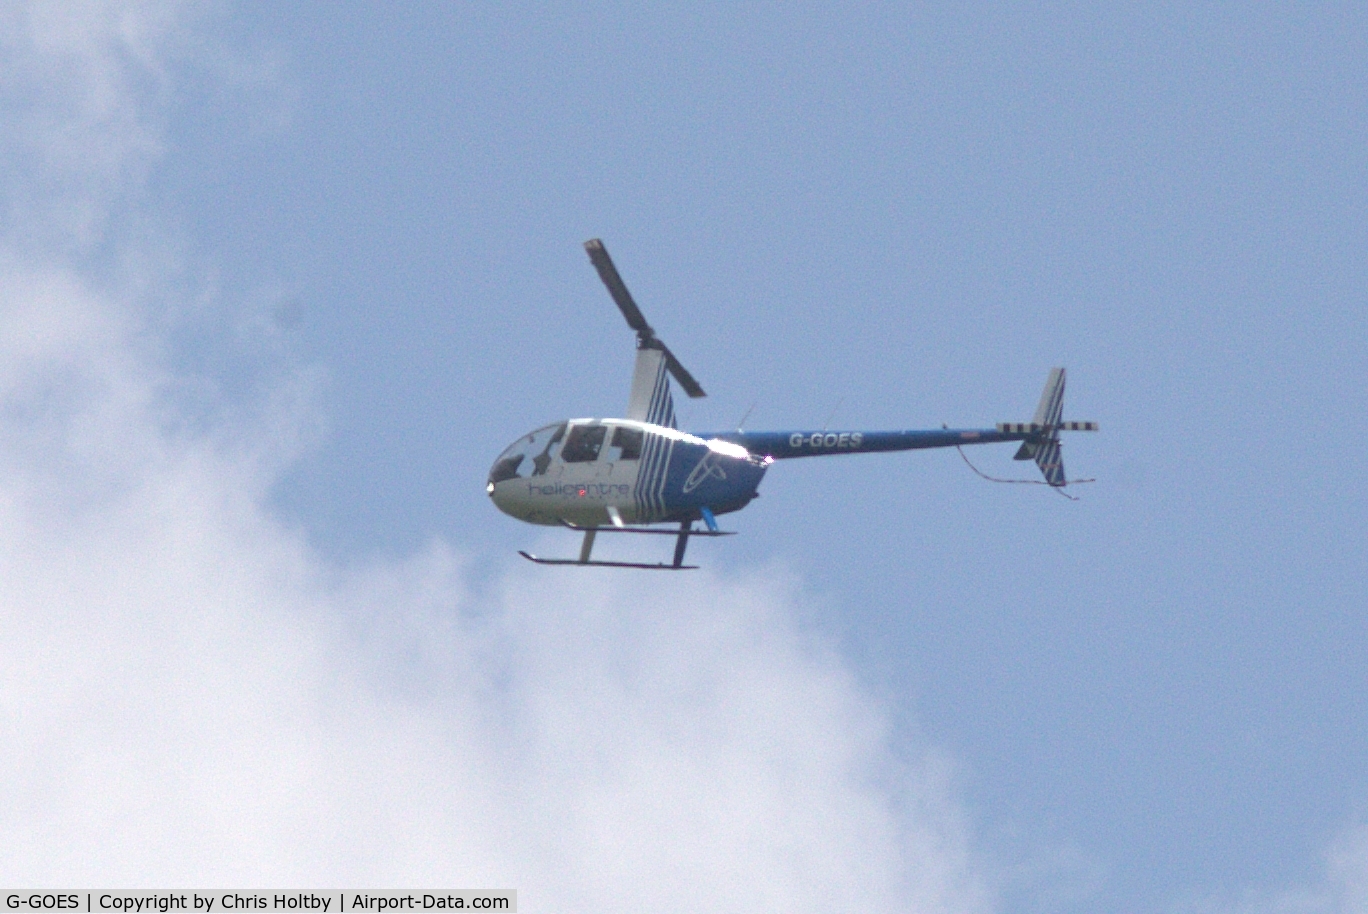 G-GOES, 2005 Robinson R44 Raven II C/N 10942, Over Potters Bar, Herts now based at Leicester Airport